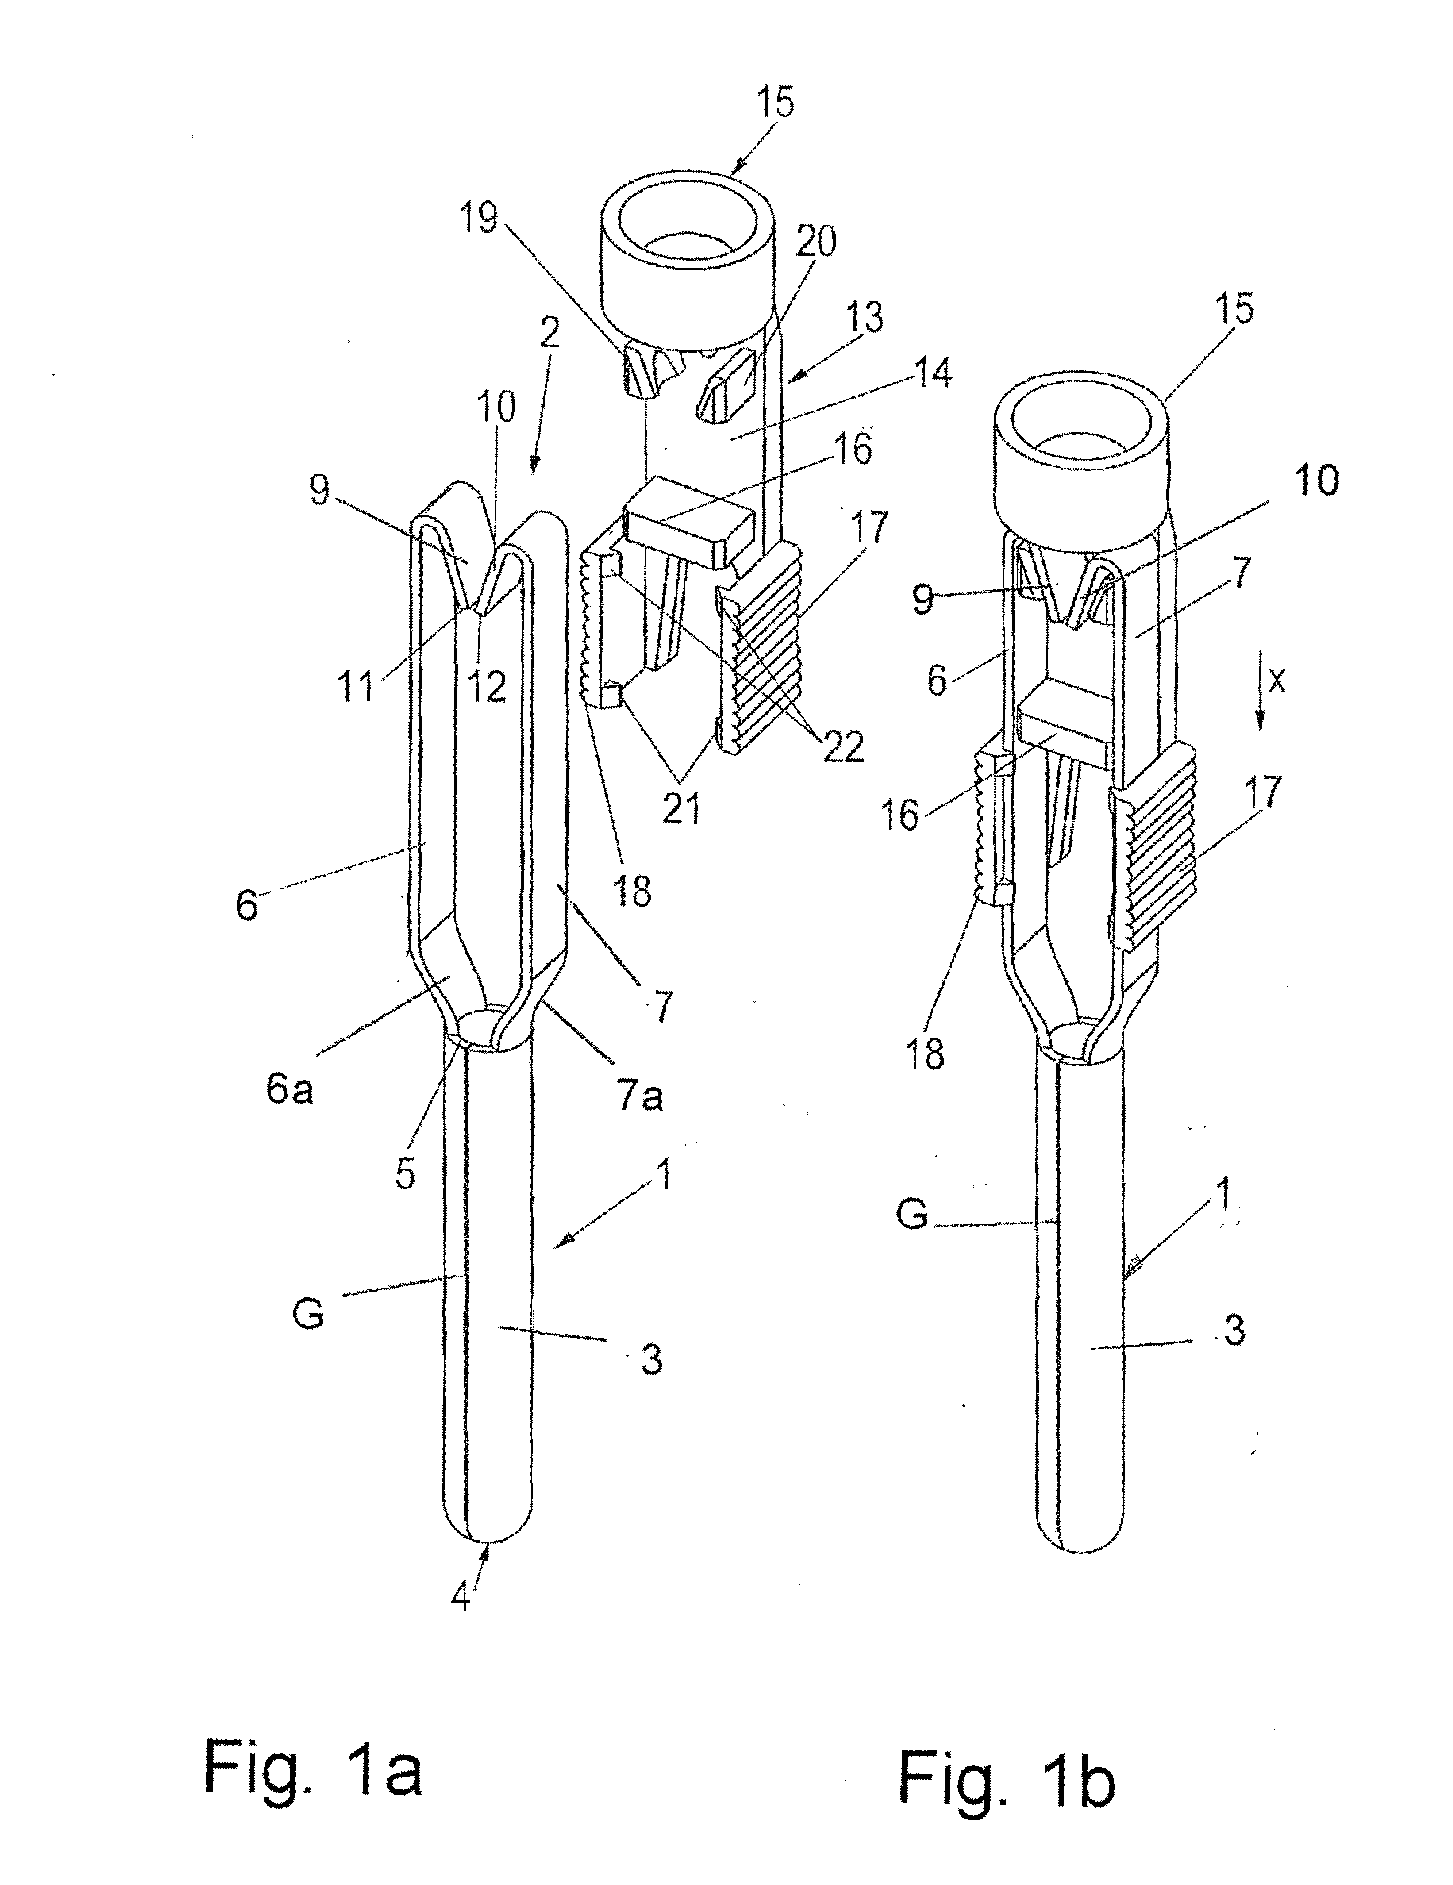 Pin or socket contact with resilient clip